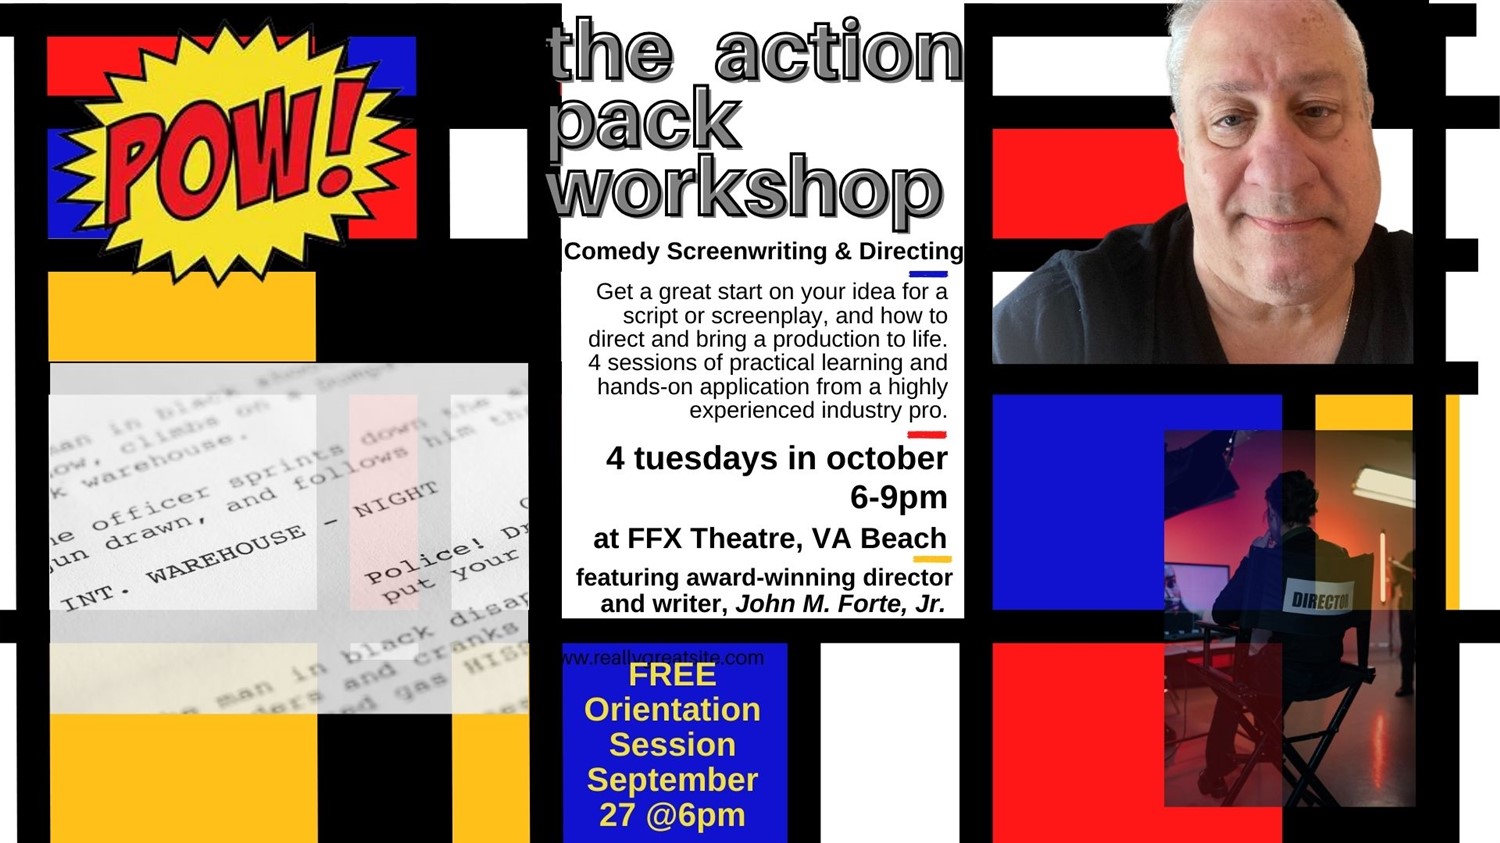 THE ACTION PACK: Session 1 of 4 - Comedy Screenwriting & Directing Workshop FEATURING JOHN FORTE! on oct. 03, 18:00@FFX Theatre - Achetez des billets et obtenez des informations surFamily Fun Xperience tickets.ffxshow.org